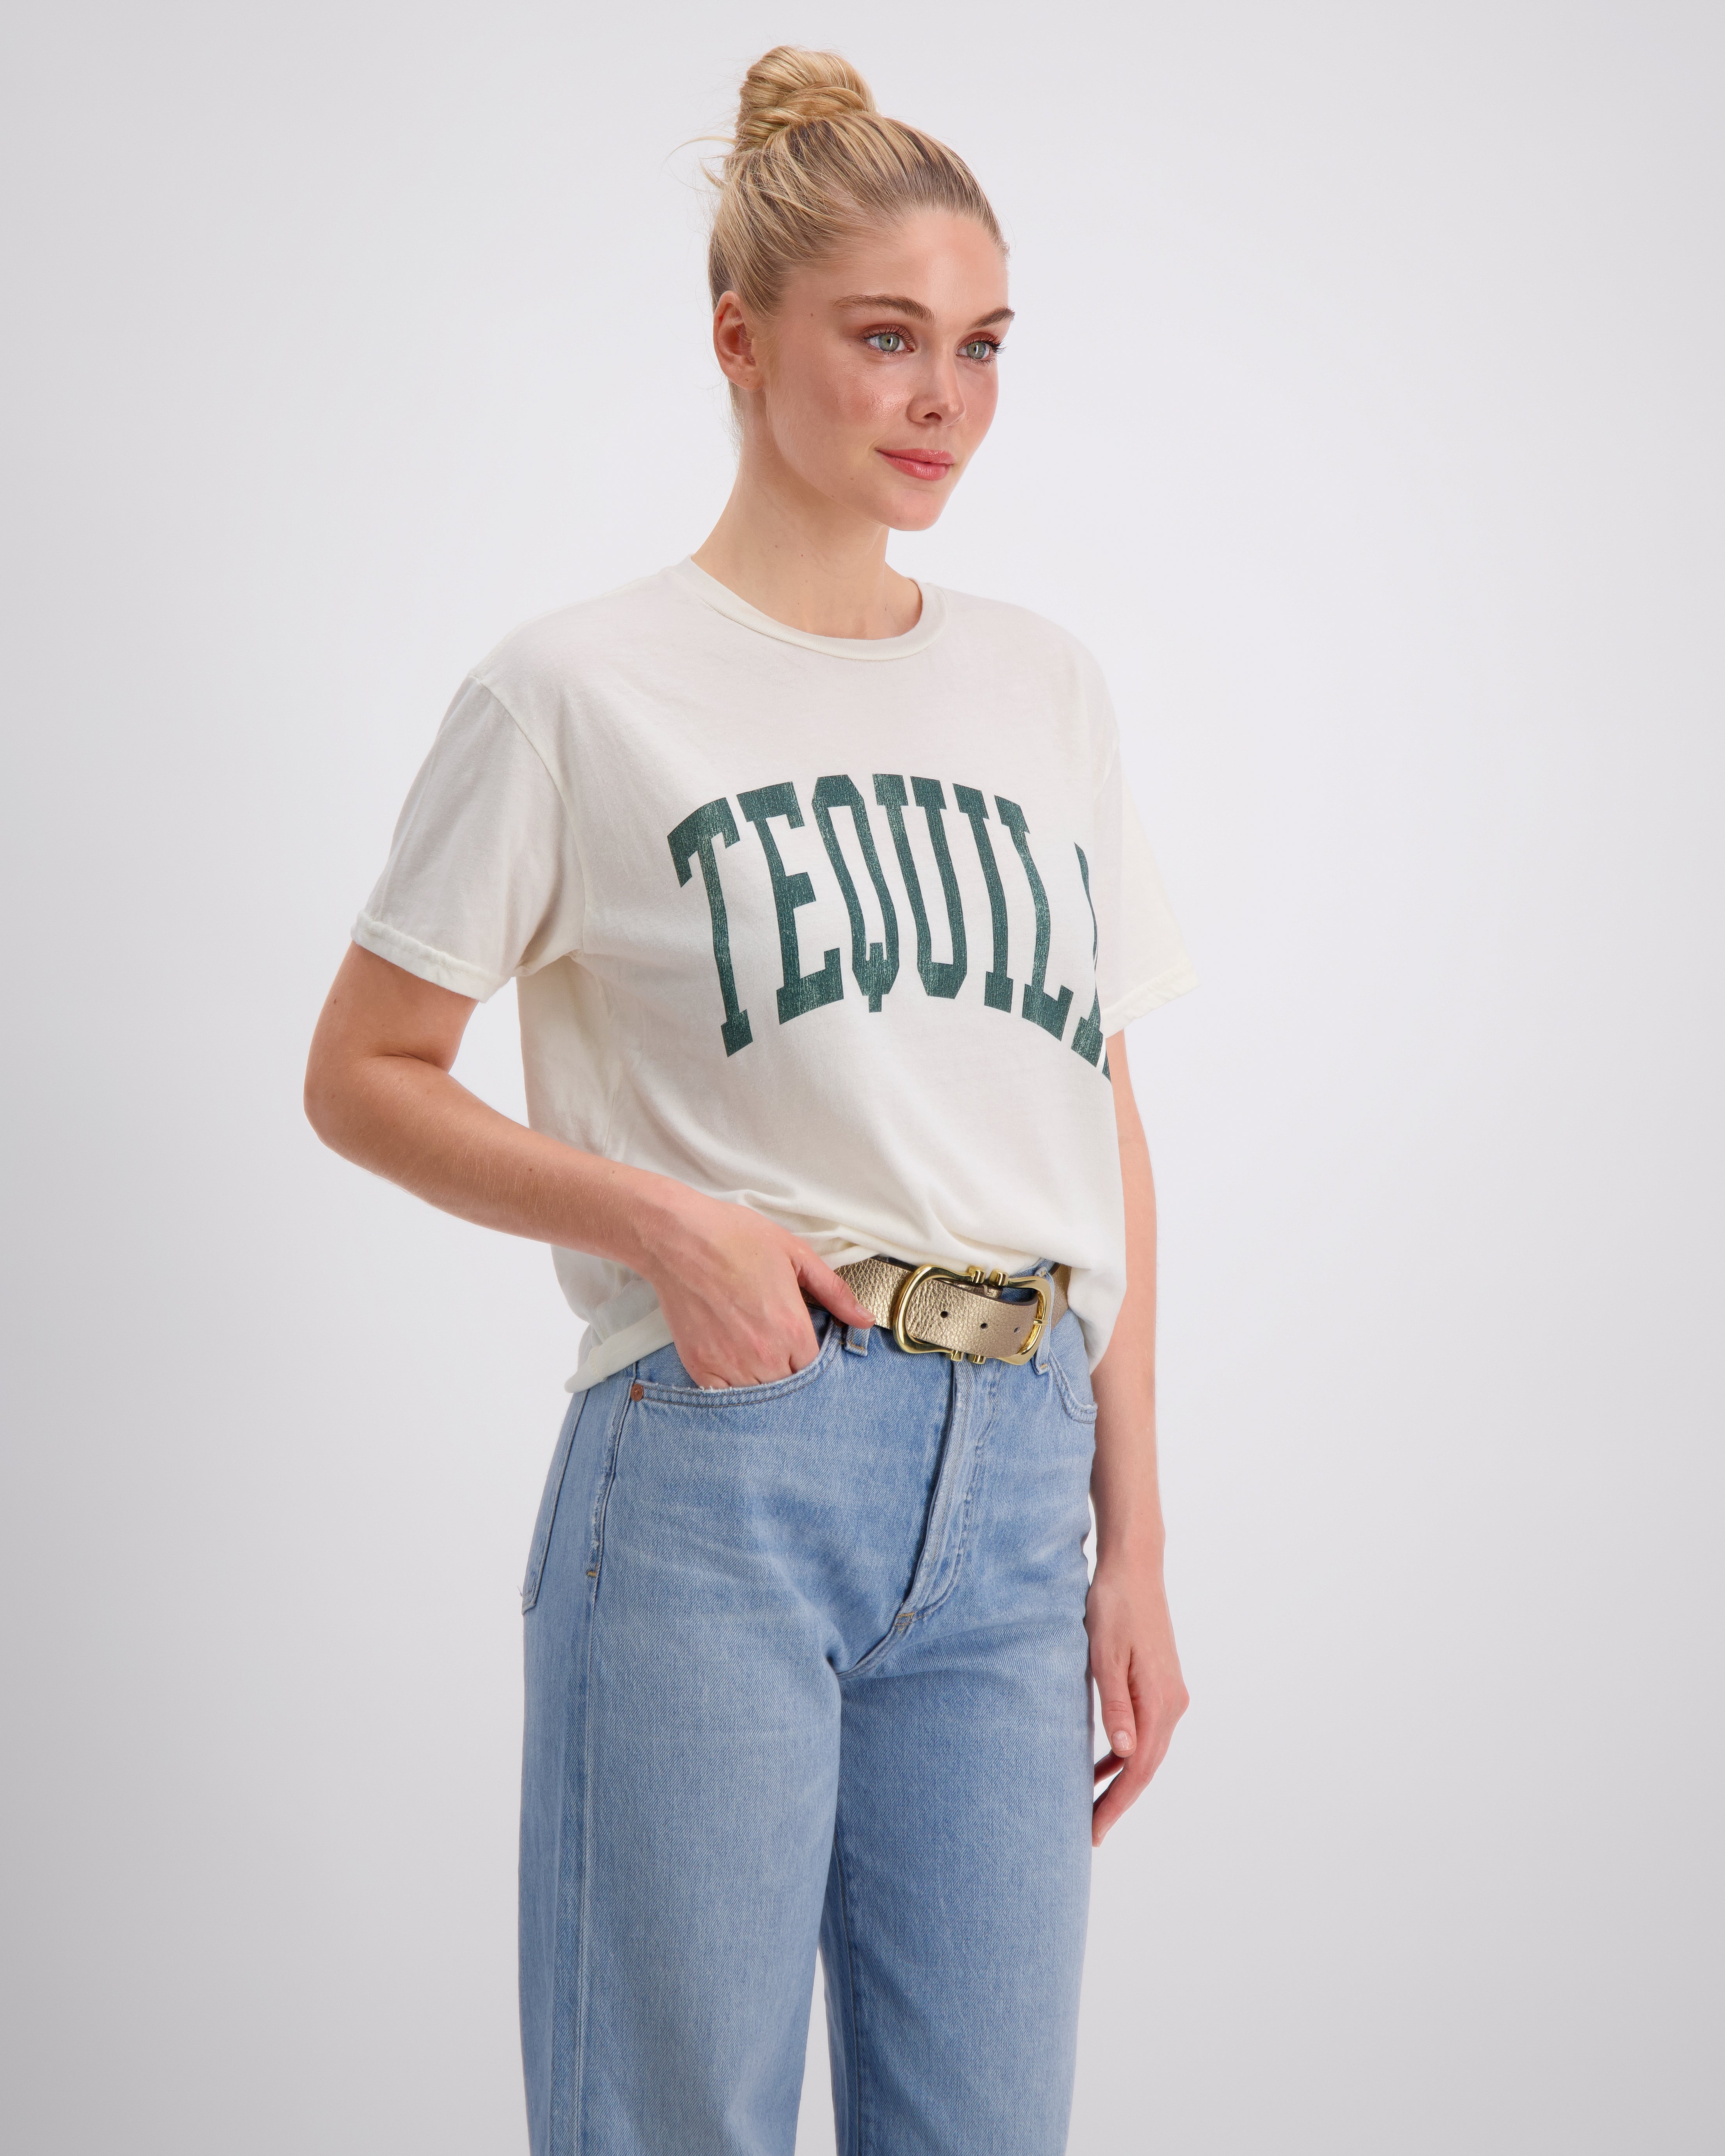 Tequilla Tee in Vintage White